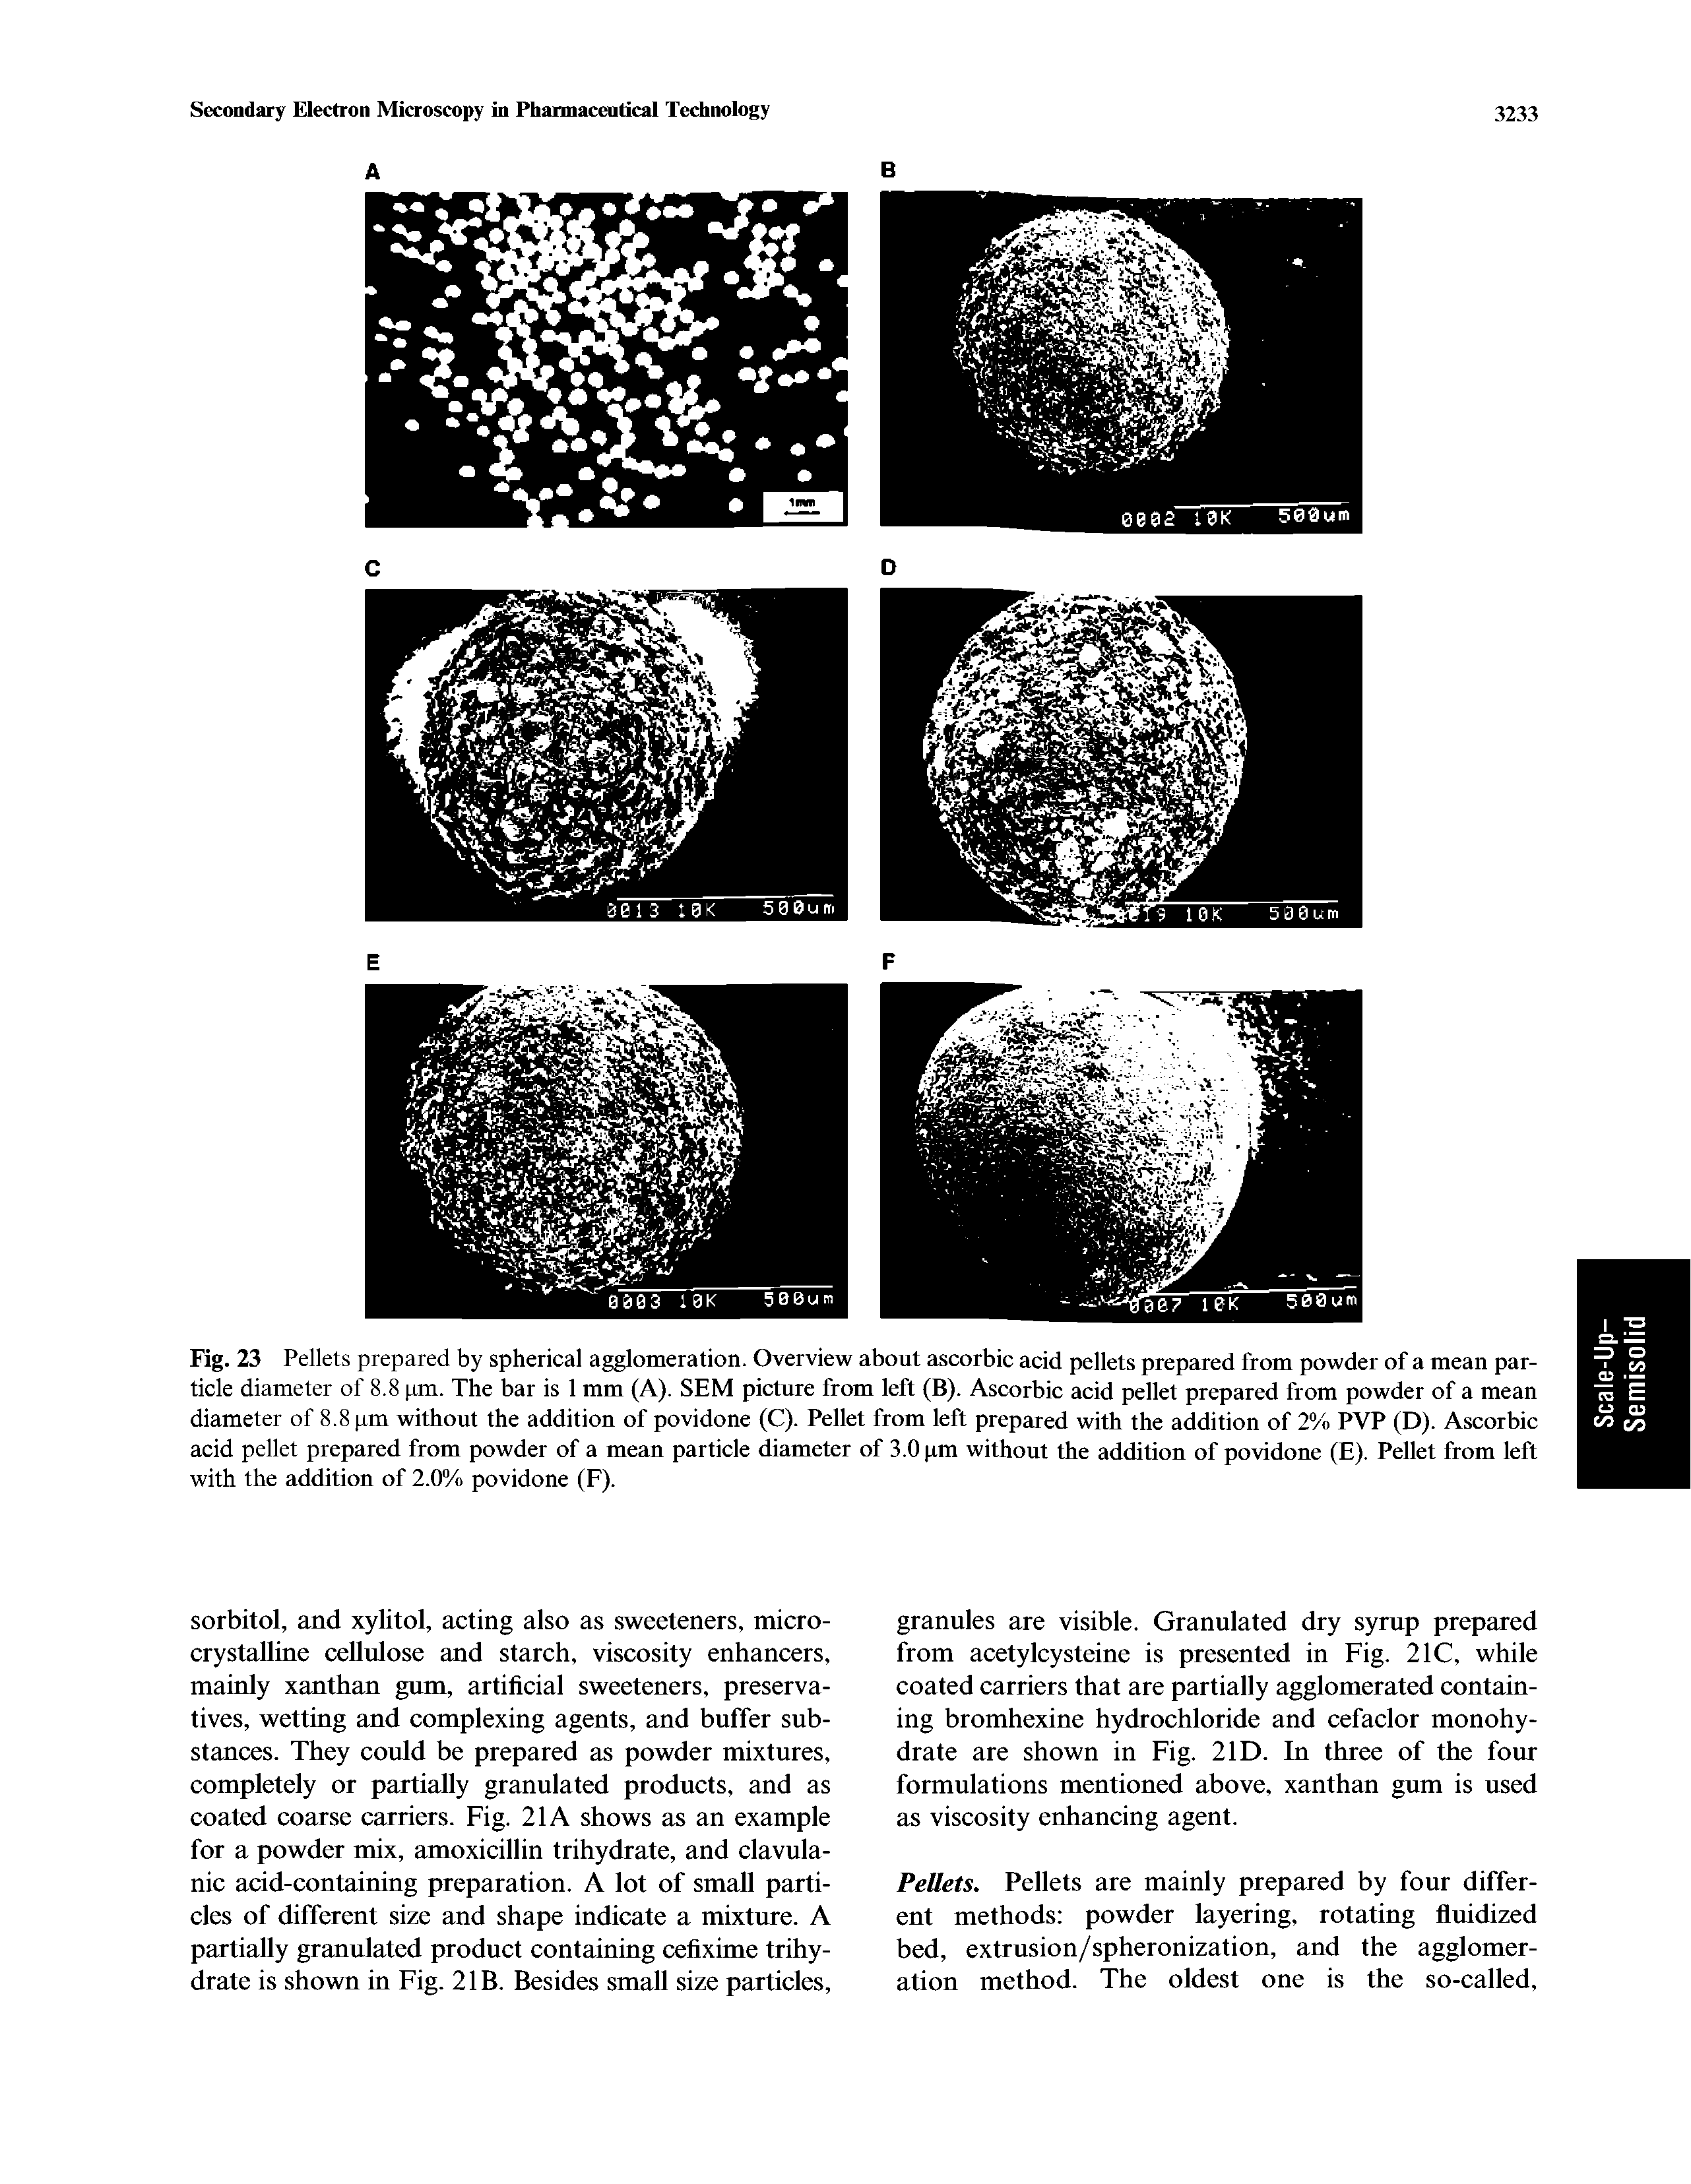 Fig. 23 Pellets prepared by spherical agglomeration. Overview about ascorbic acid pellets prepared from powder of a mean particle diameter of 8.8 pm. The bar is 1 mm (A). SEM picture from left (B). Ascorbic acid pellet prepared from powder of a mean diameter of 8.8 pm without the addition of povidone (C). Pellet from left prepared with the addition of 2% PVP (D). Ascorbic acid pellet prepared from powder of a mean particle diameter of 3.0 pm without the addition of povidone (E). Pellet from left with the addition of 2.0% povidone (F).